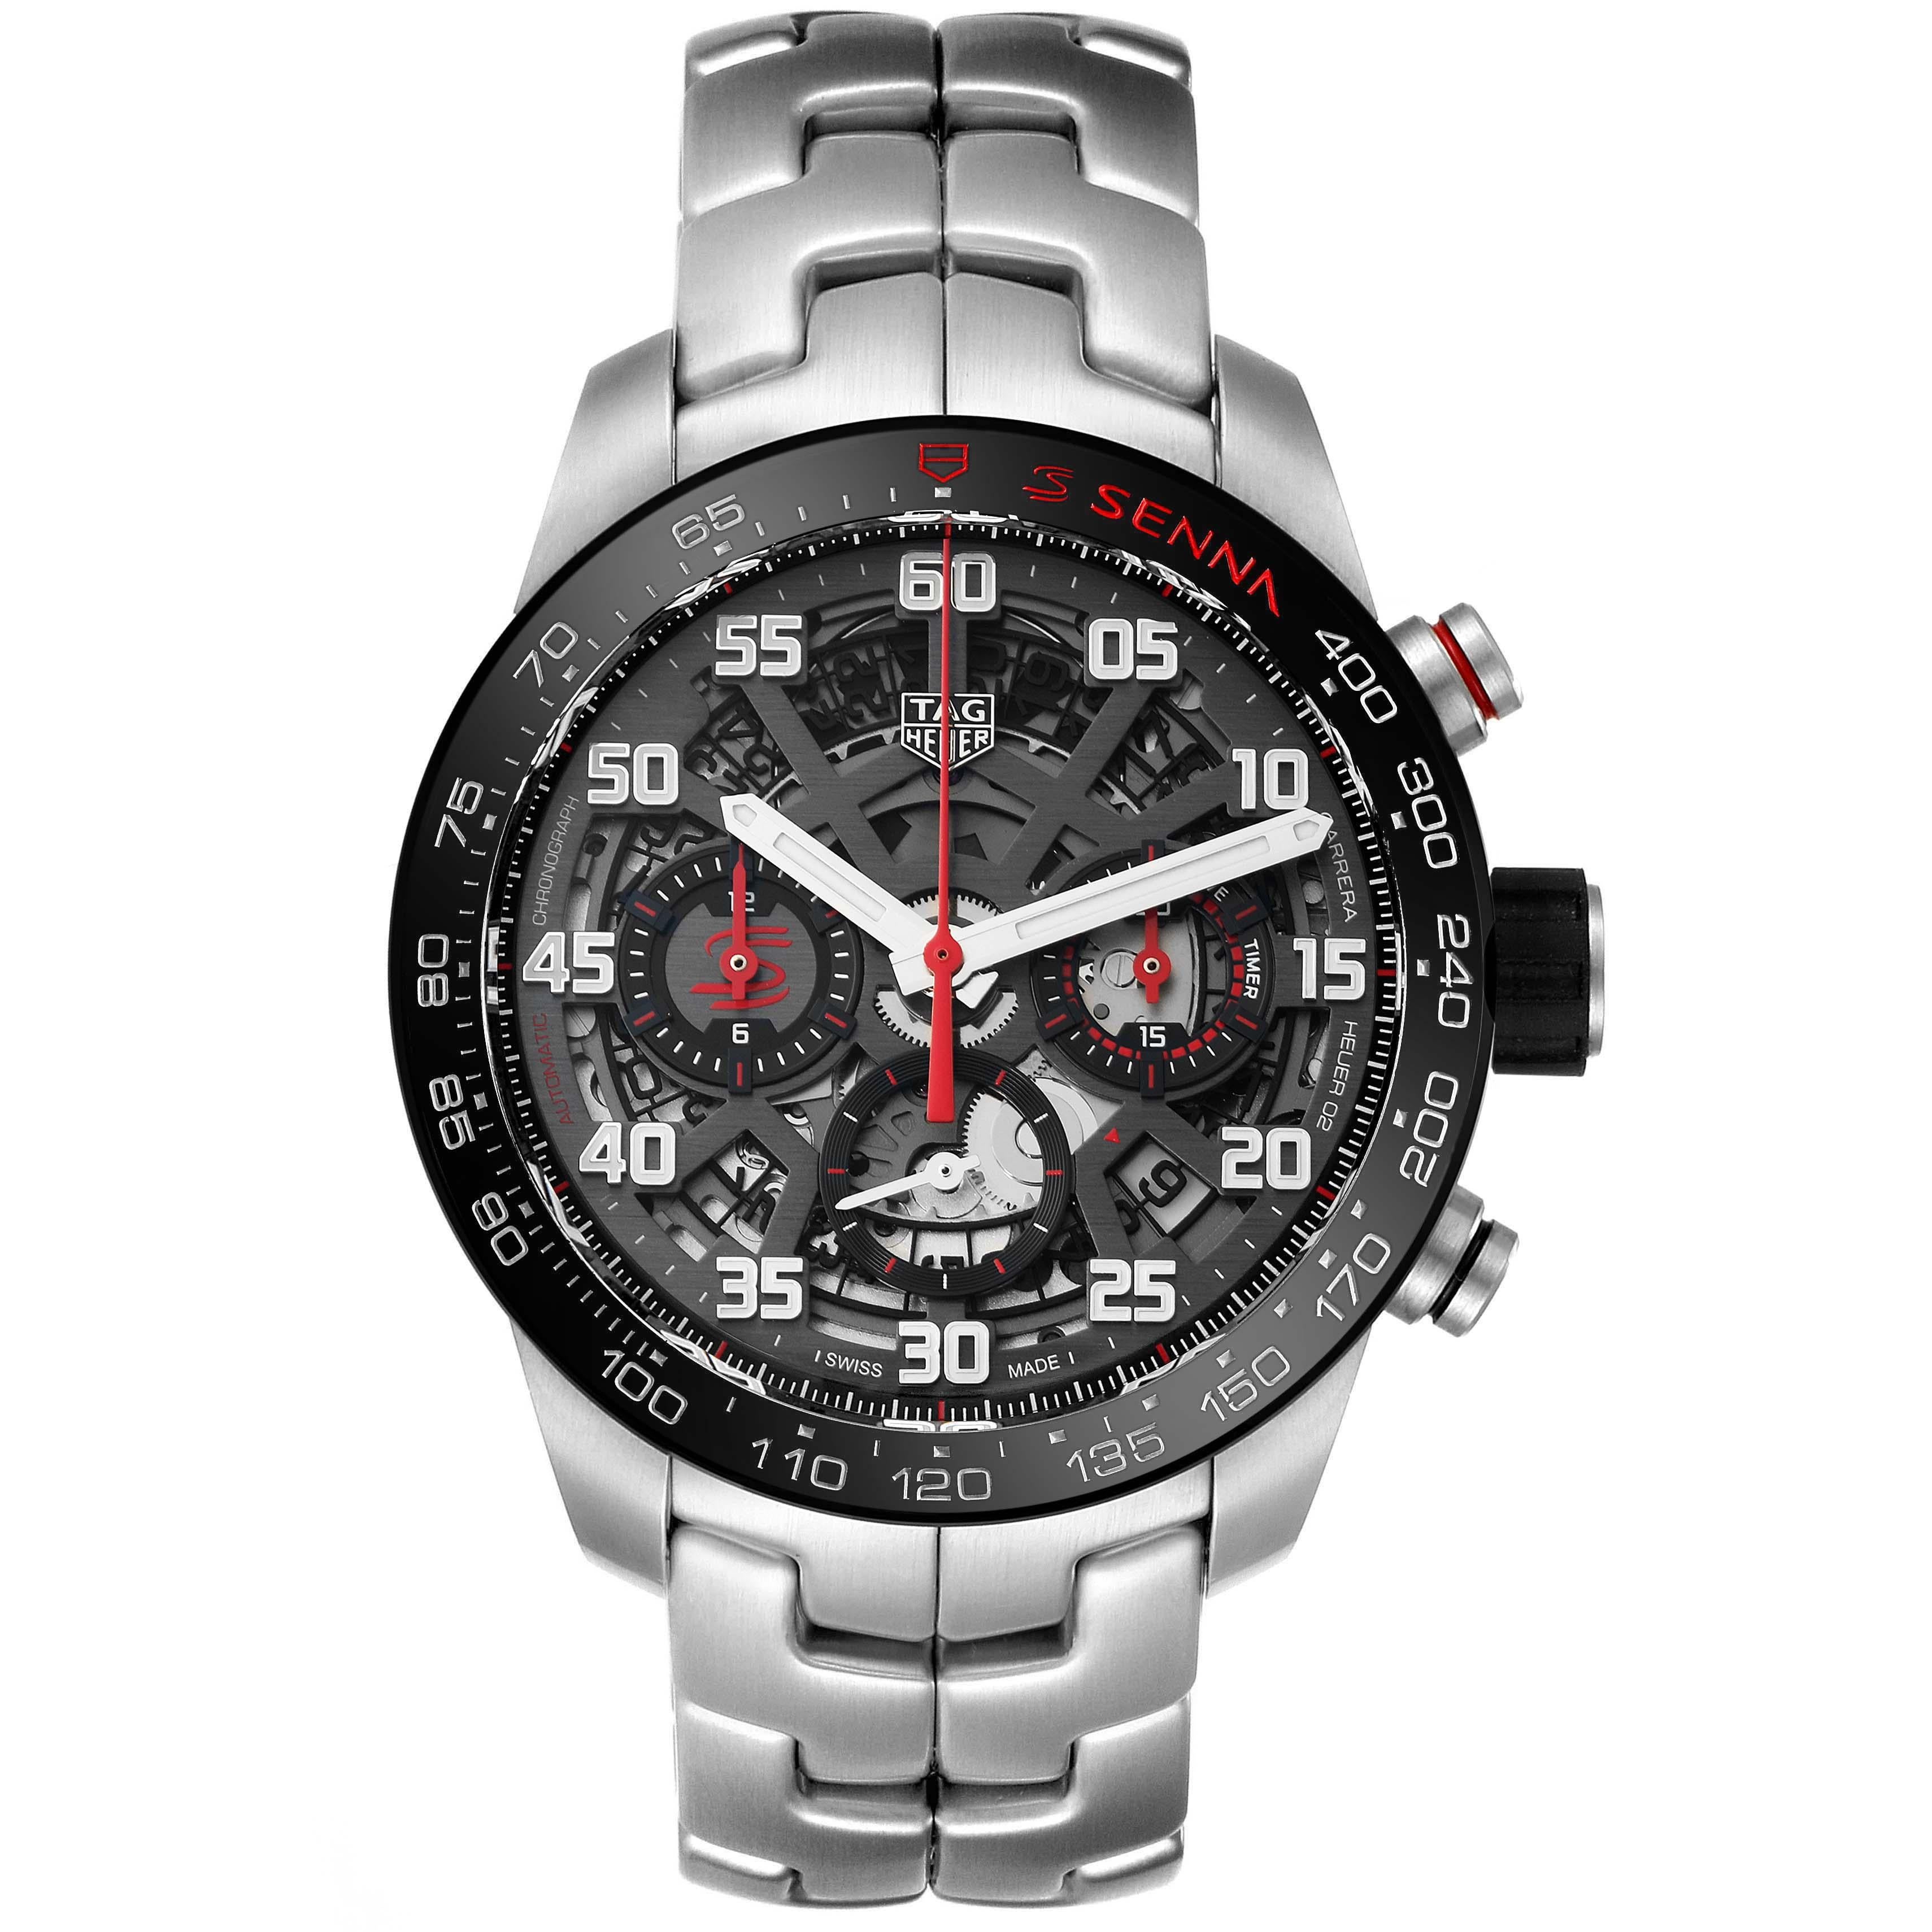 Tag Heuer Carrera Senna Special Edition Steel Mens Watch CBG2013 Box Card. Automatic self-winding movement. Stainless steel case 43.0 mm.   Transparent exhibition sapphire crystal caseback. Black bezel with tachymeter scale. Scratch resistant